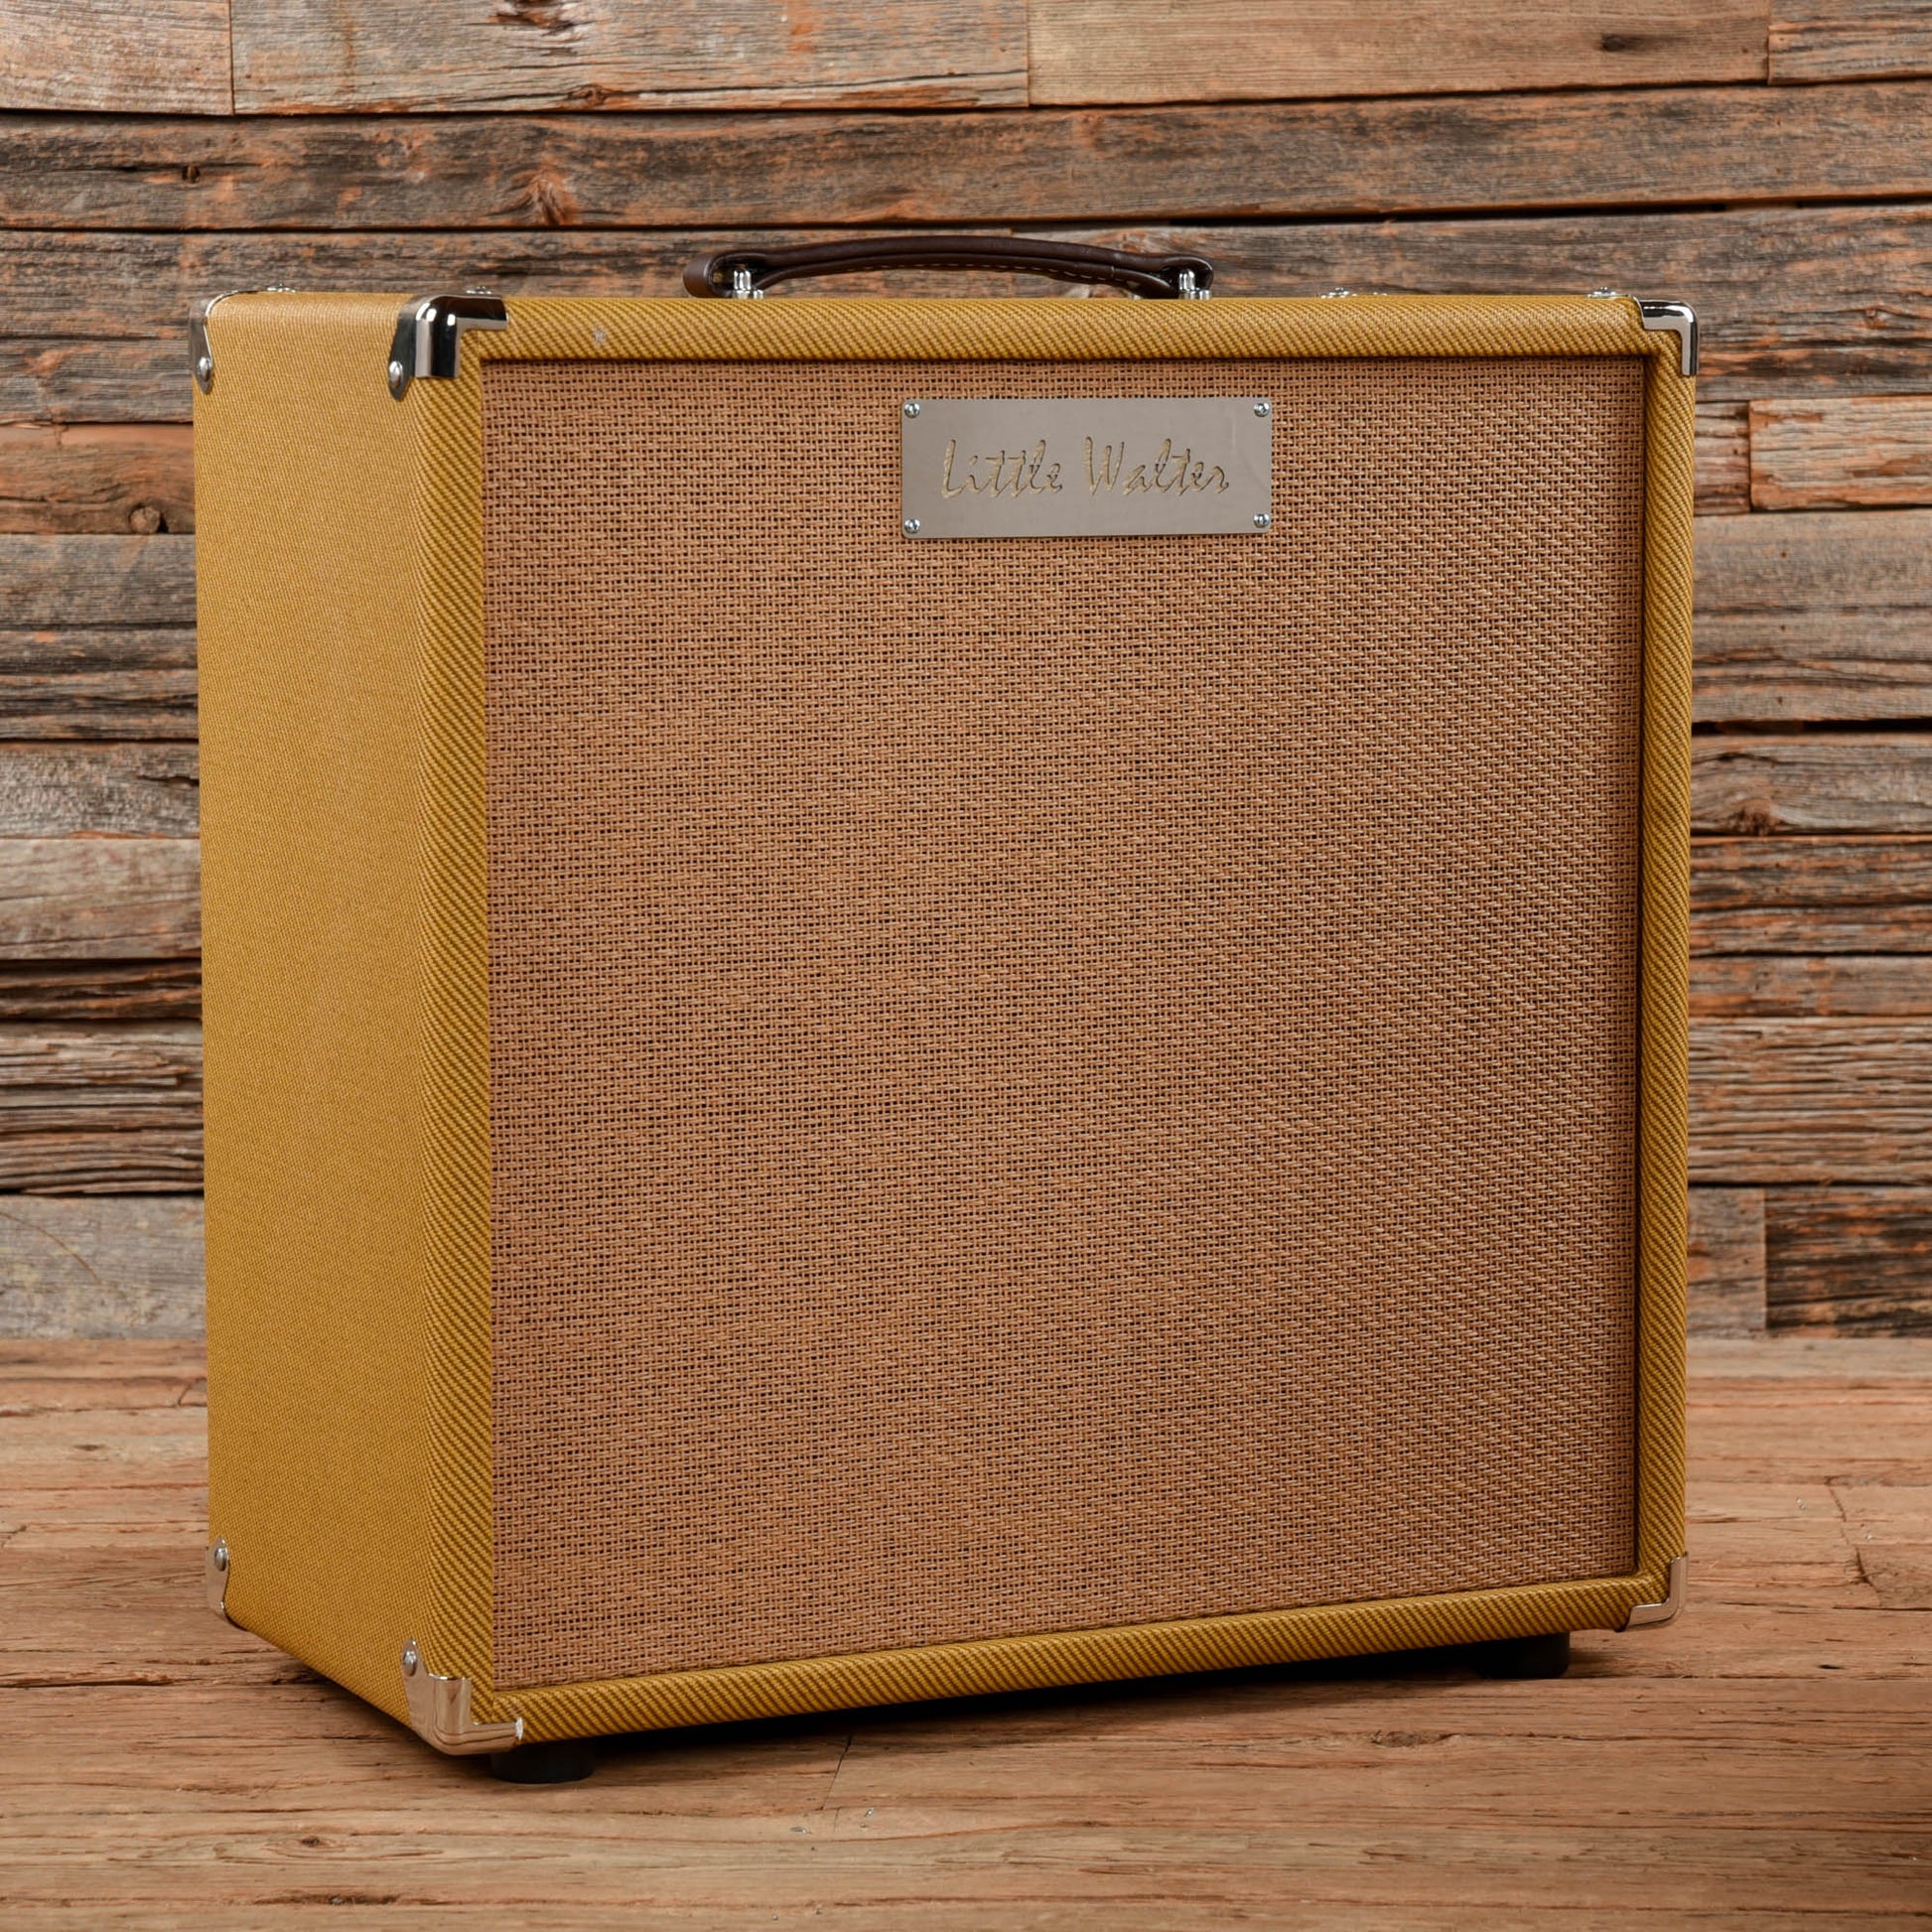 Little Walter 1x15 Guitar Cabinet Amps / Guitar Cabinets